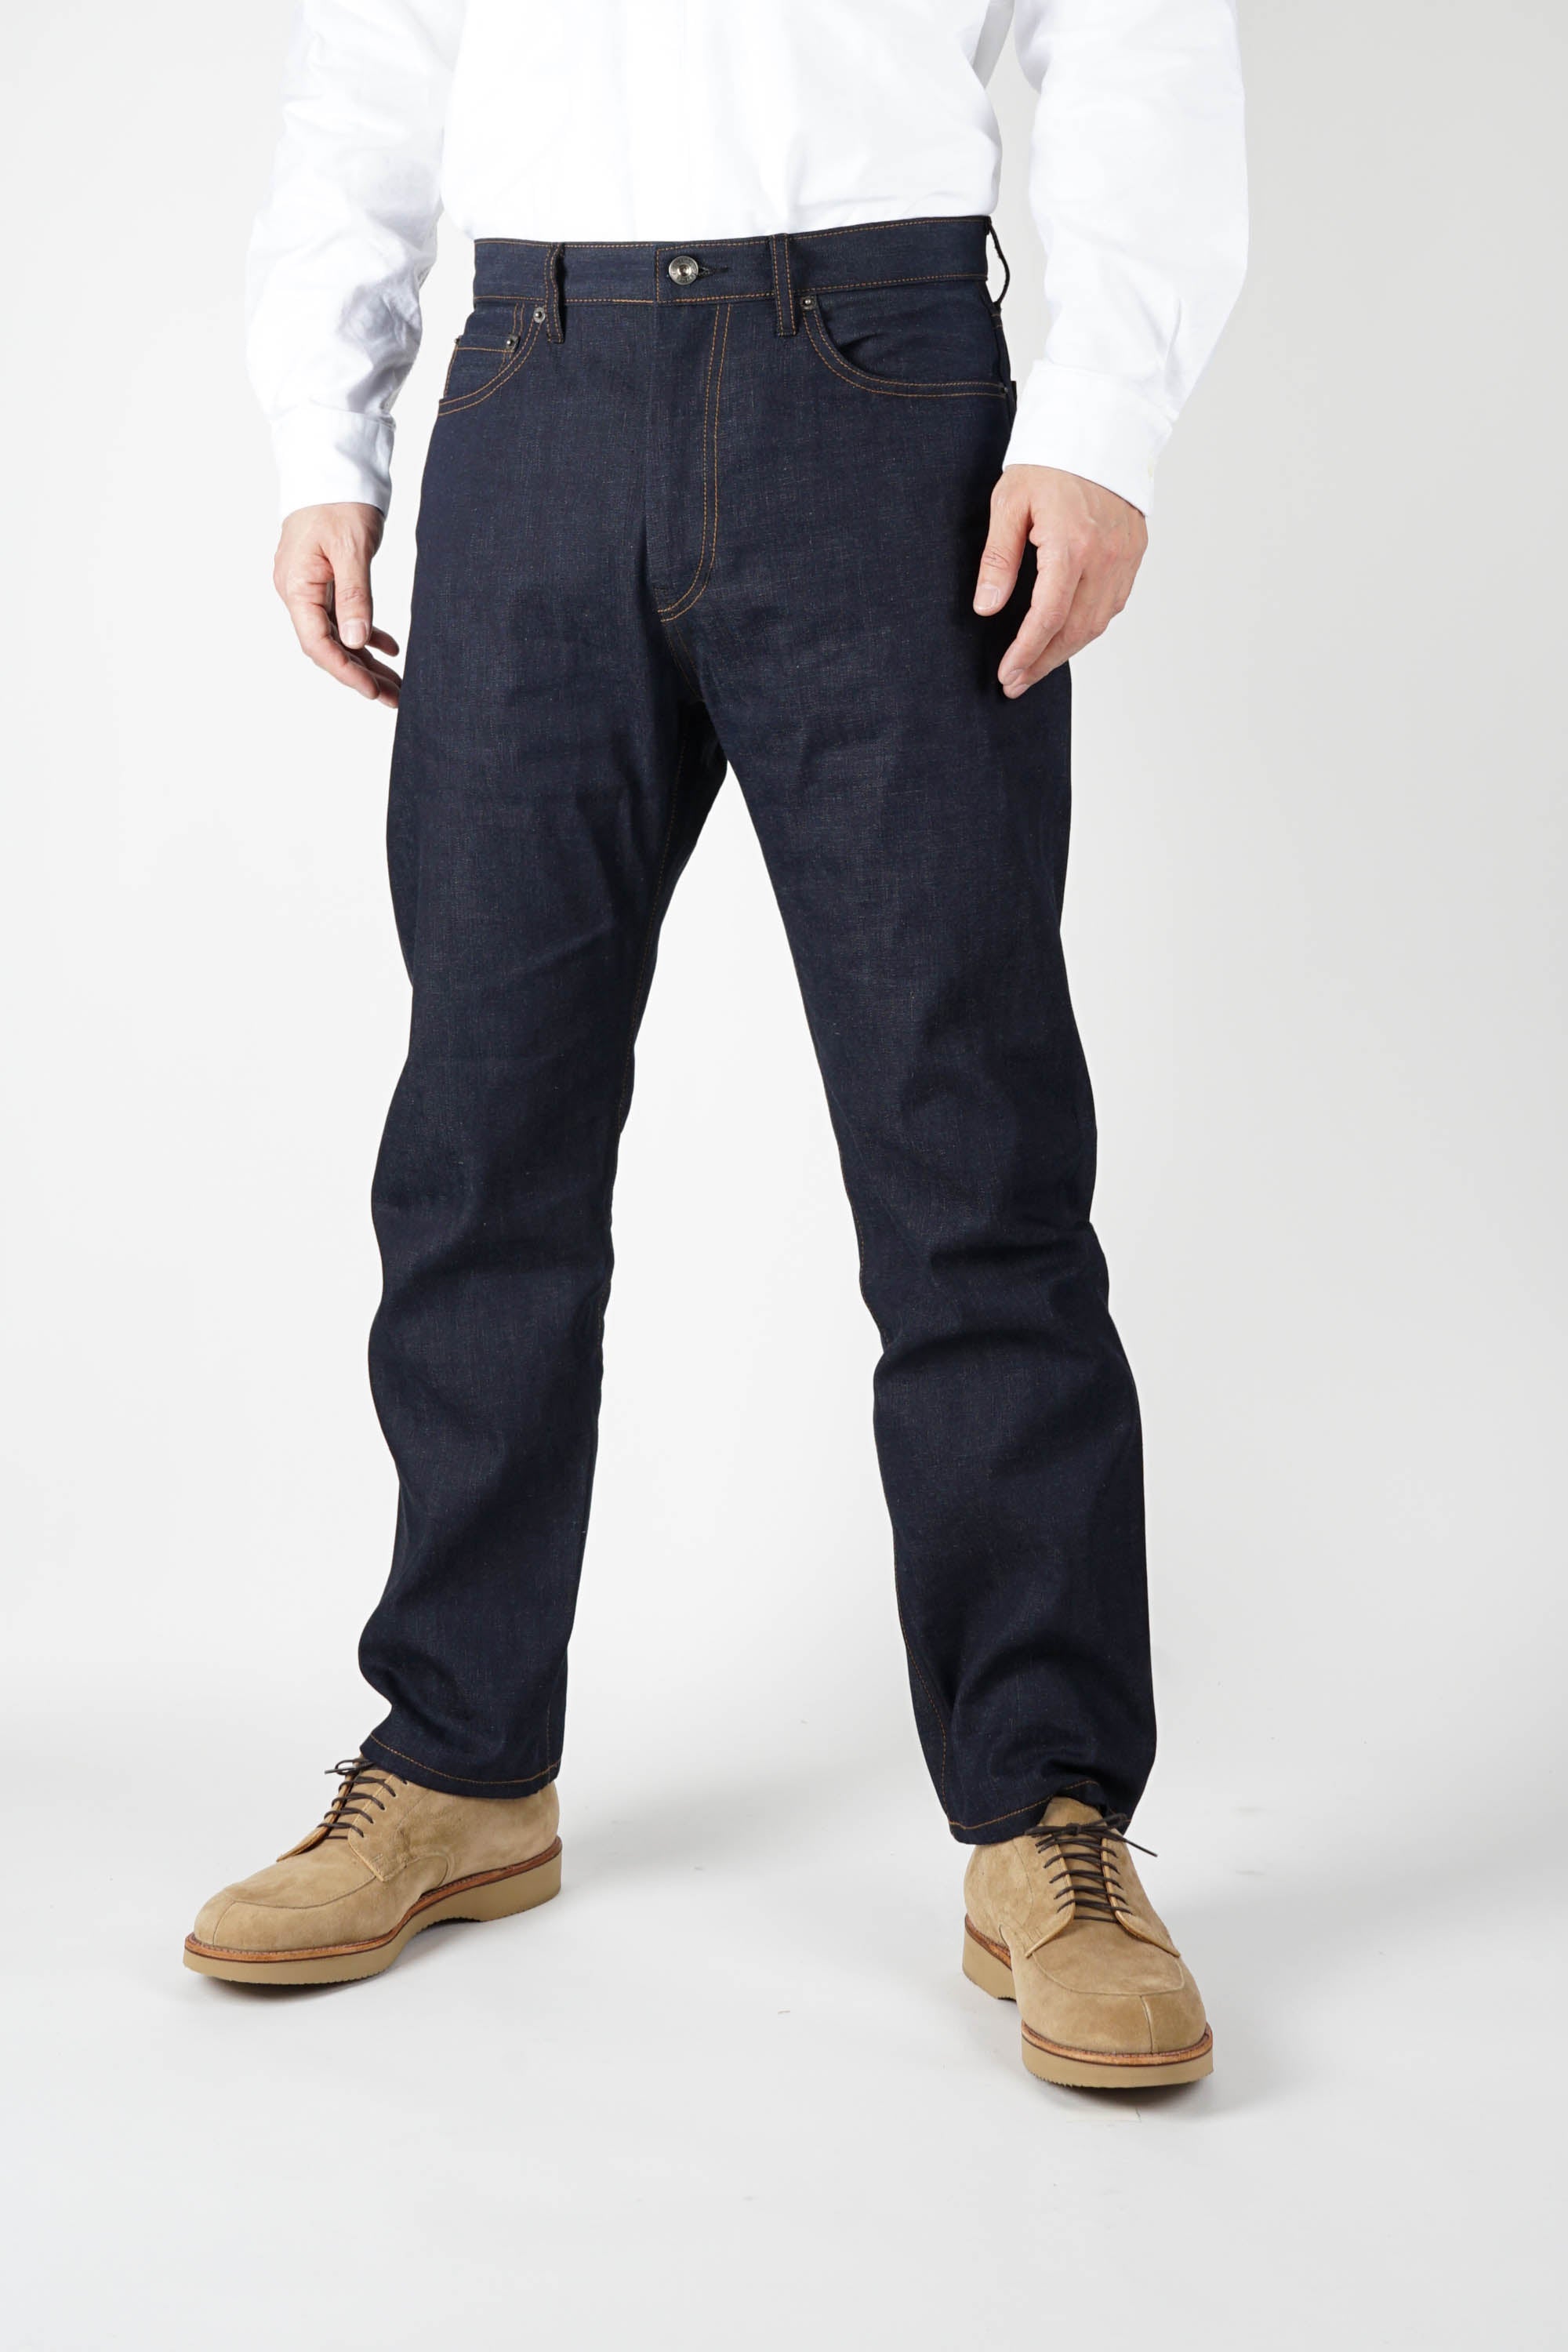 Type 5 Jeans 10oz Cone | Nepenthes York